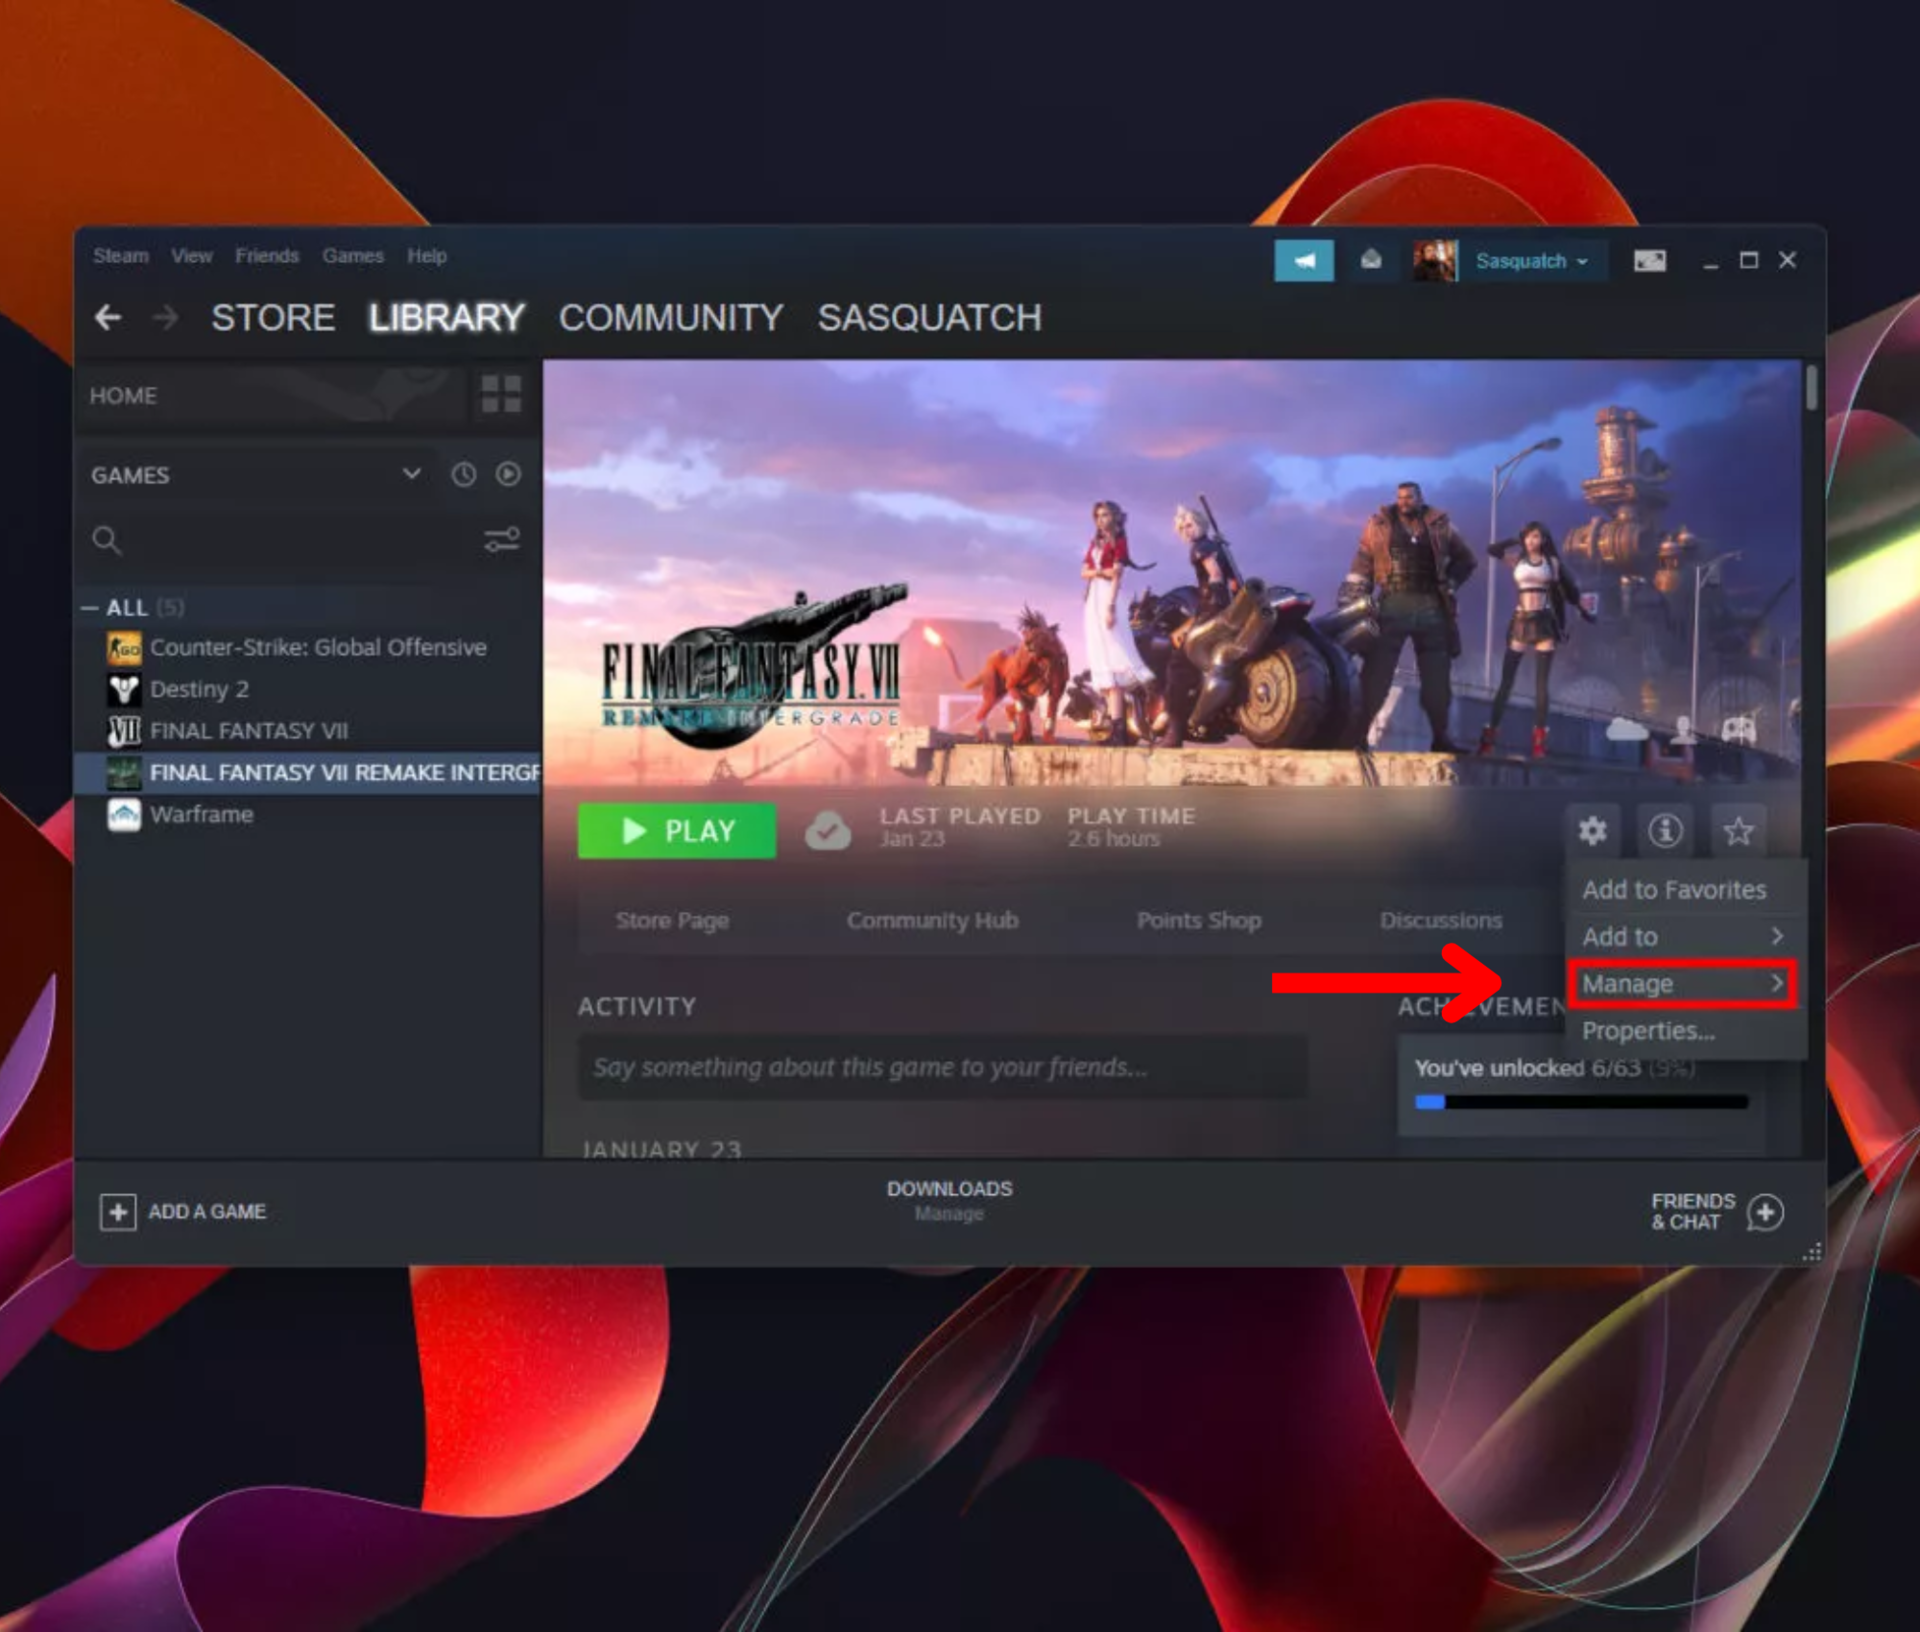 Steam may soon let you hide specific games from your friends